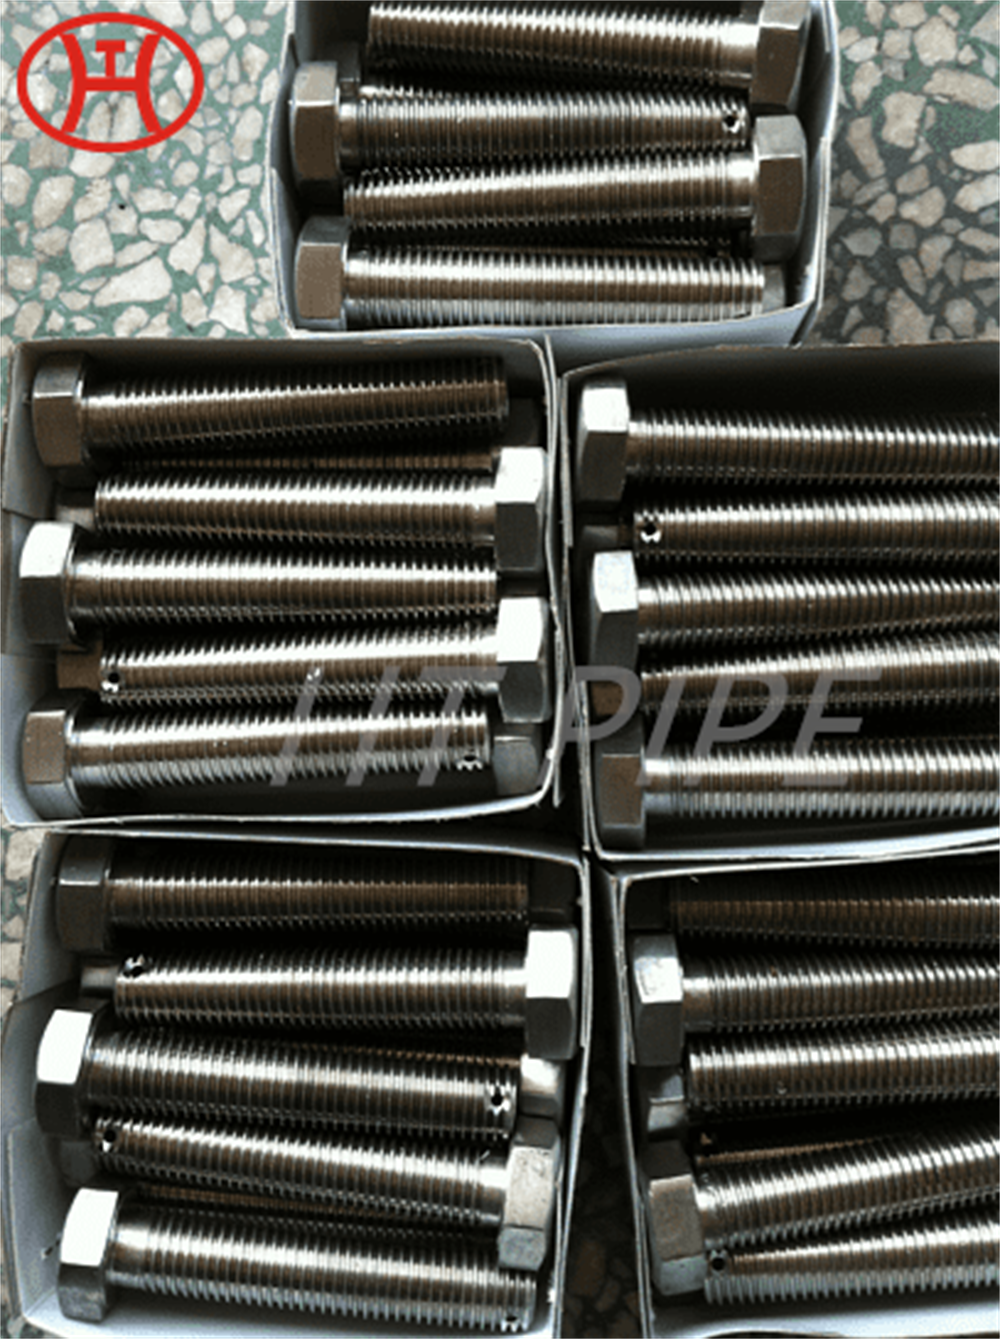 Inconel 625 Alloy 625 nickel alloy steel fasteners 1-4-3  hex bolt and steel bolts